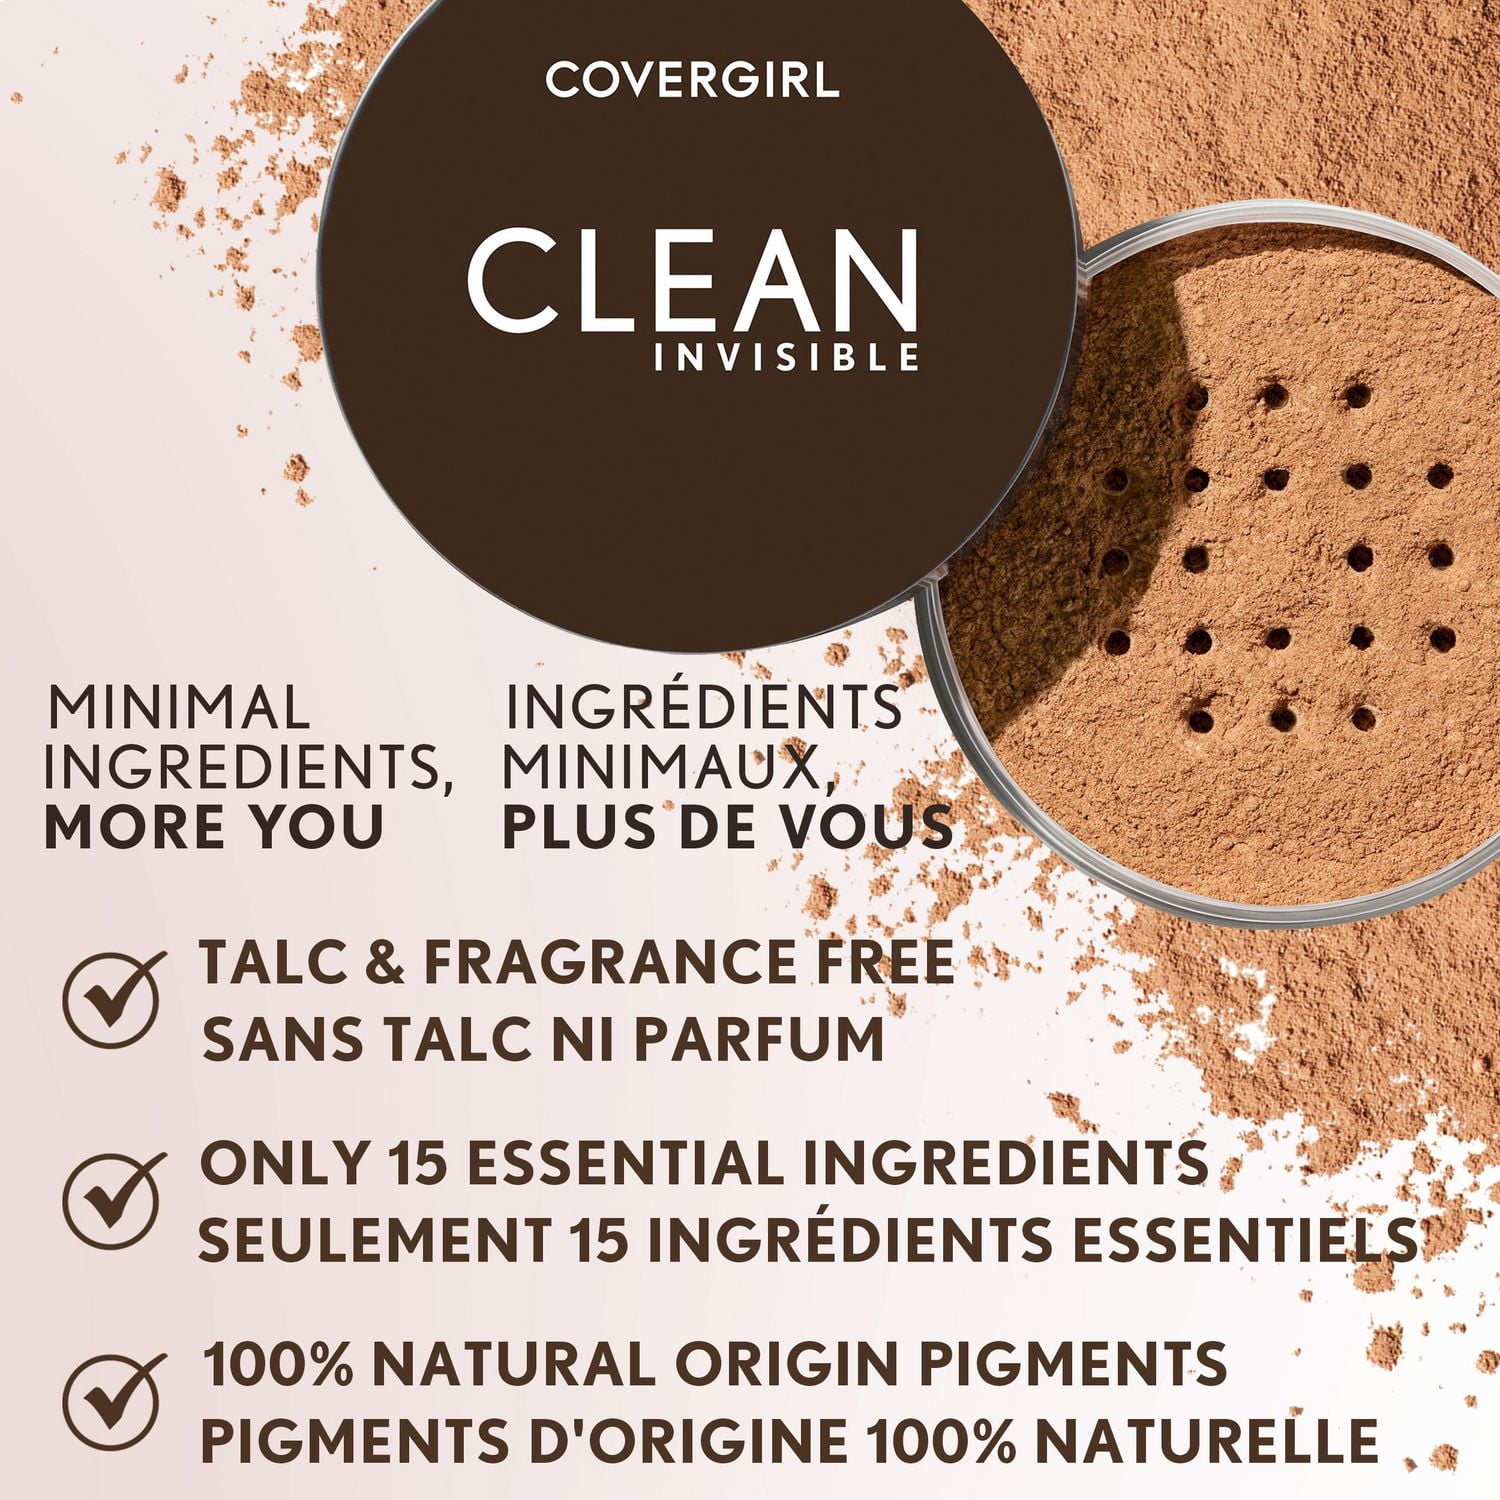 COVERGIRL Clean Invisible Loose Powder, 100% natural origin pigments & only  15 essential non-clogging ingredients, lightweight, breathable formula,  Talc & Fragrance Free 